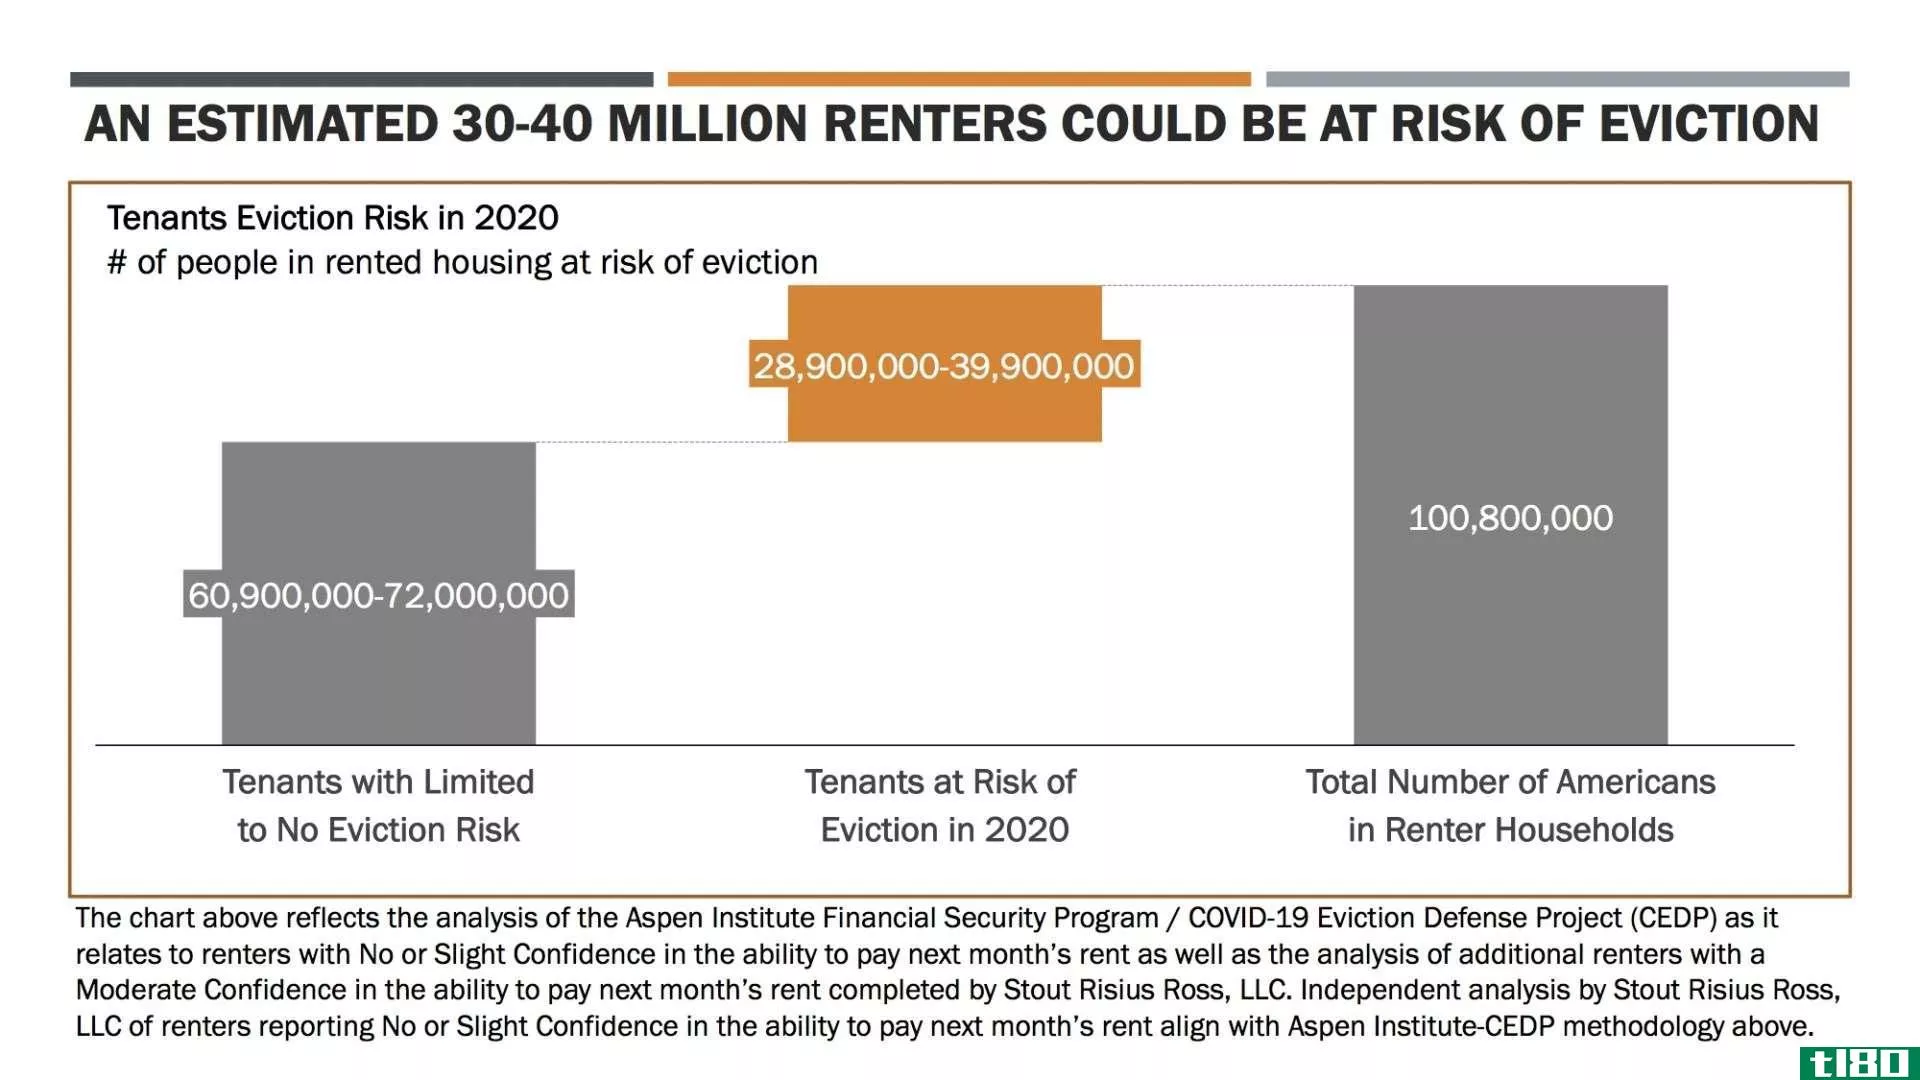 Chart with estimated number of renters at risk of eviction